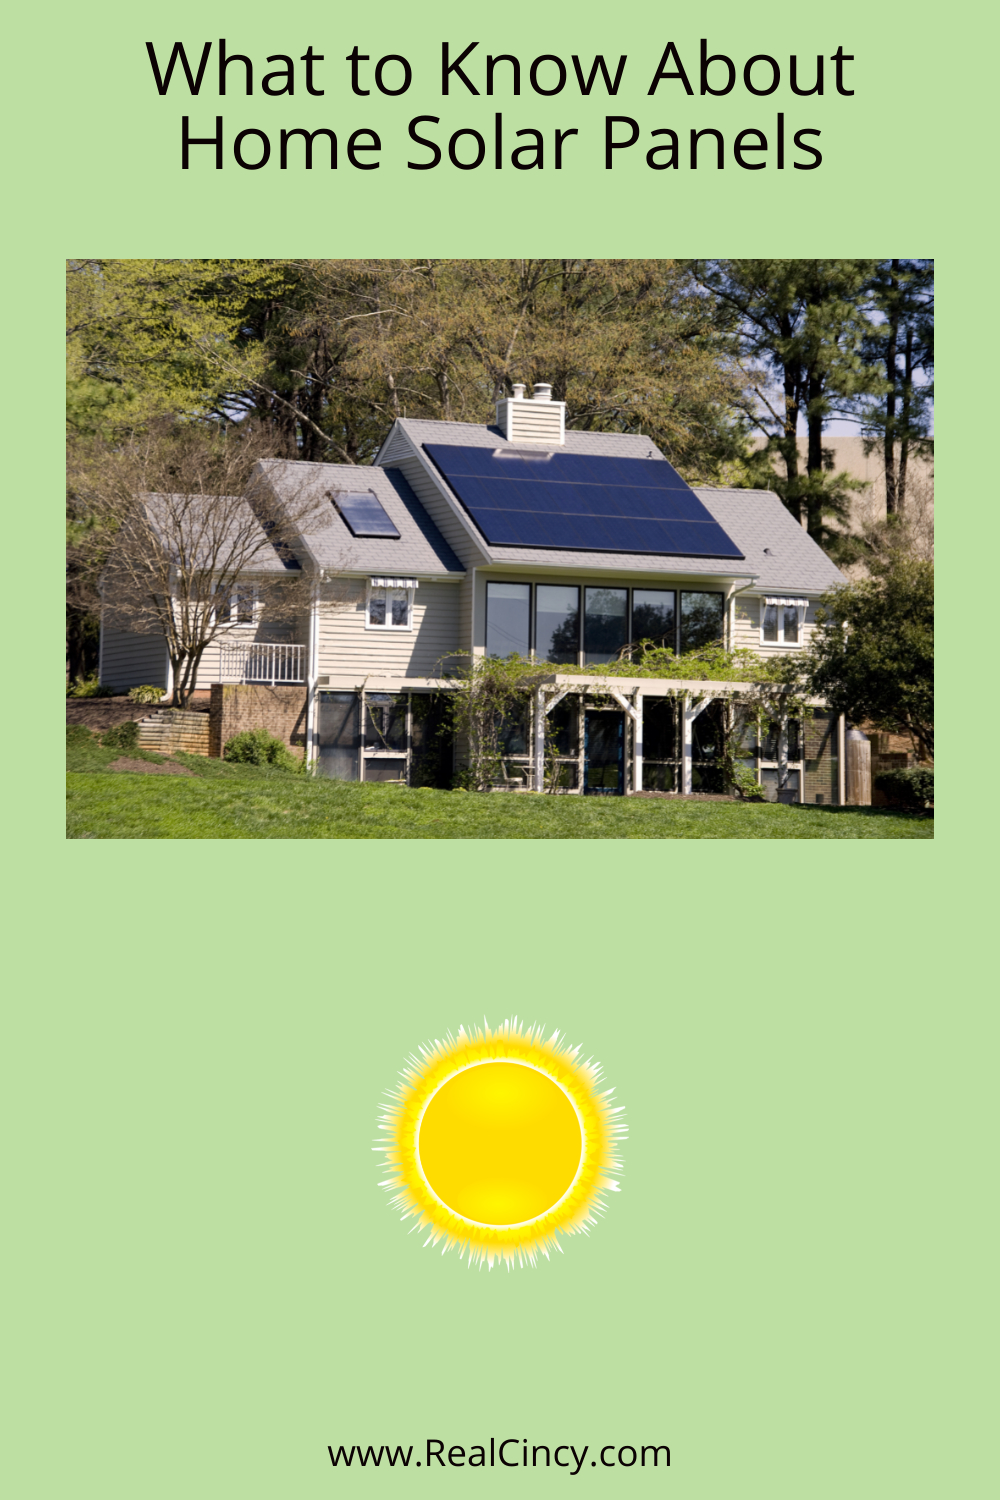 solar for your home?